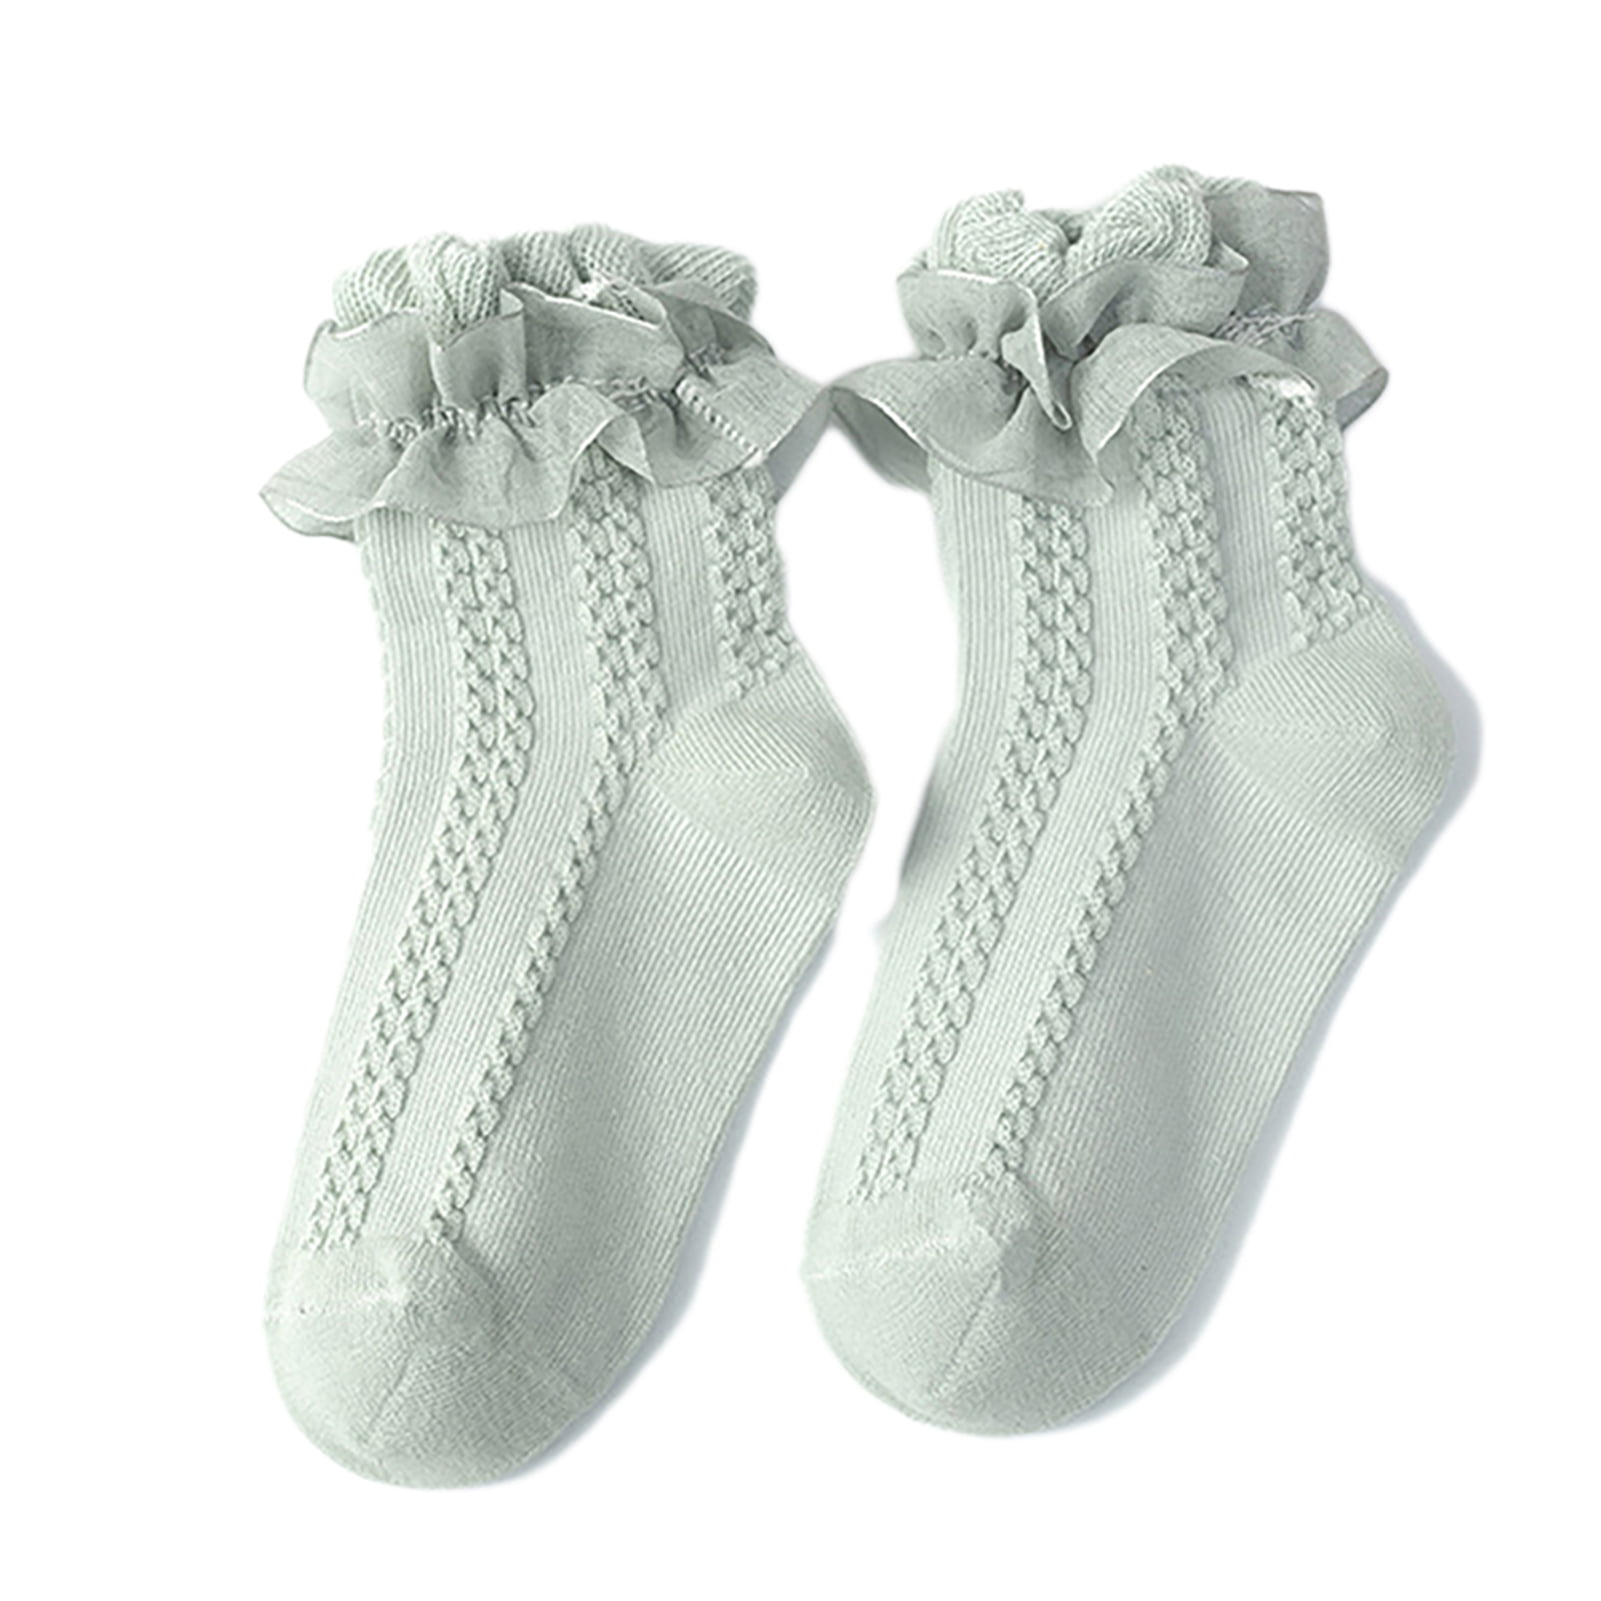 9, 12-3 9 x Pair Girls Kids WHITE LACE Frilly Top Ankle Daily Use School Socks